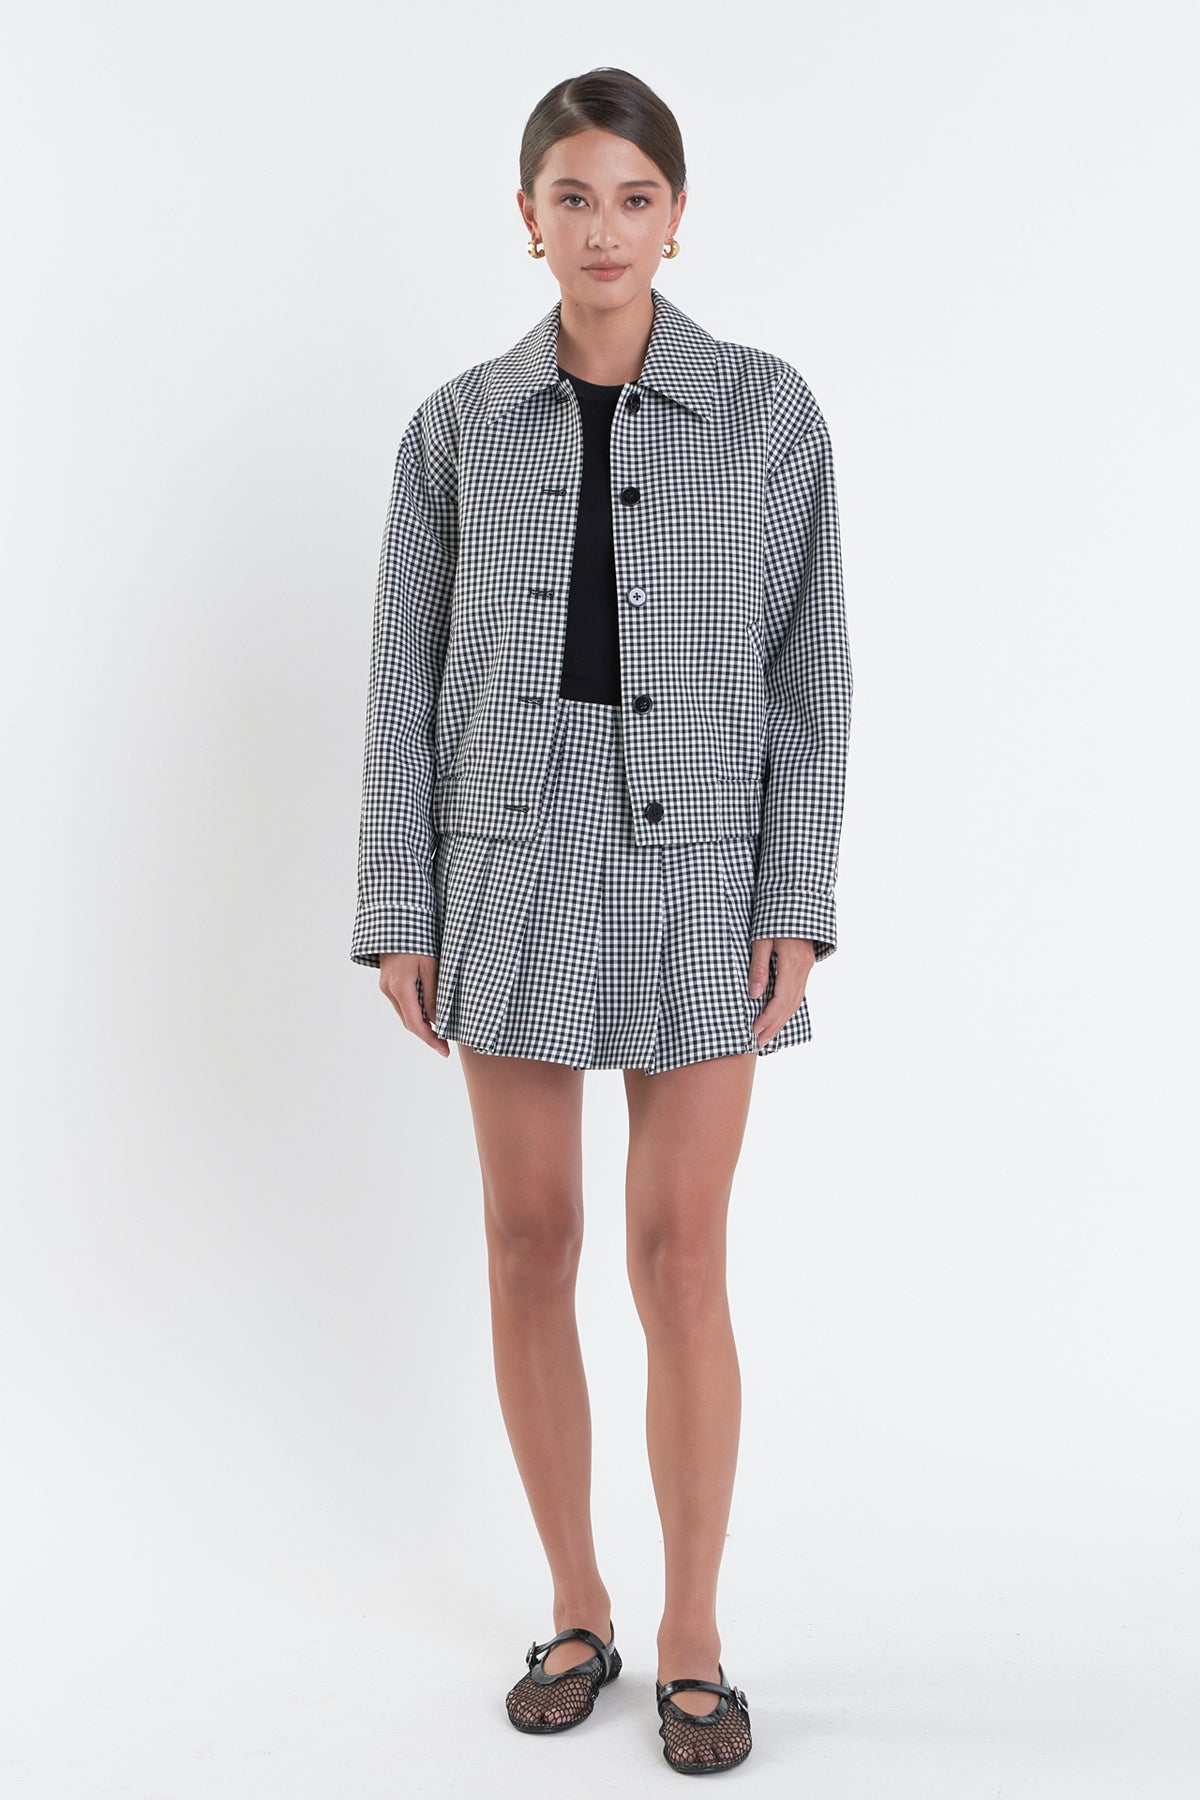 ENGLISH FACTORY - Gingham Check Jacket - JACKETS available at Objectrare